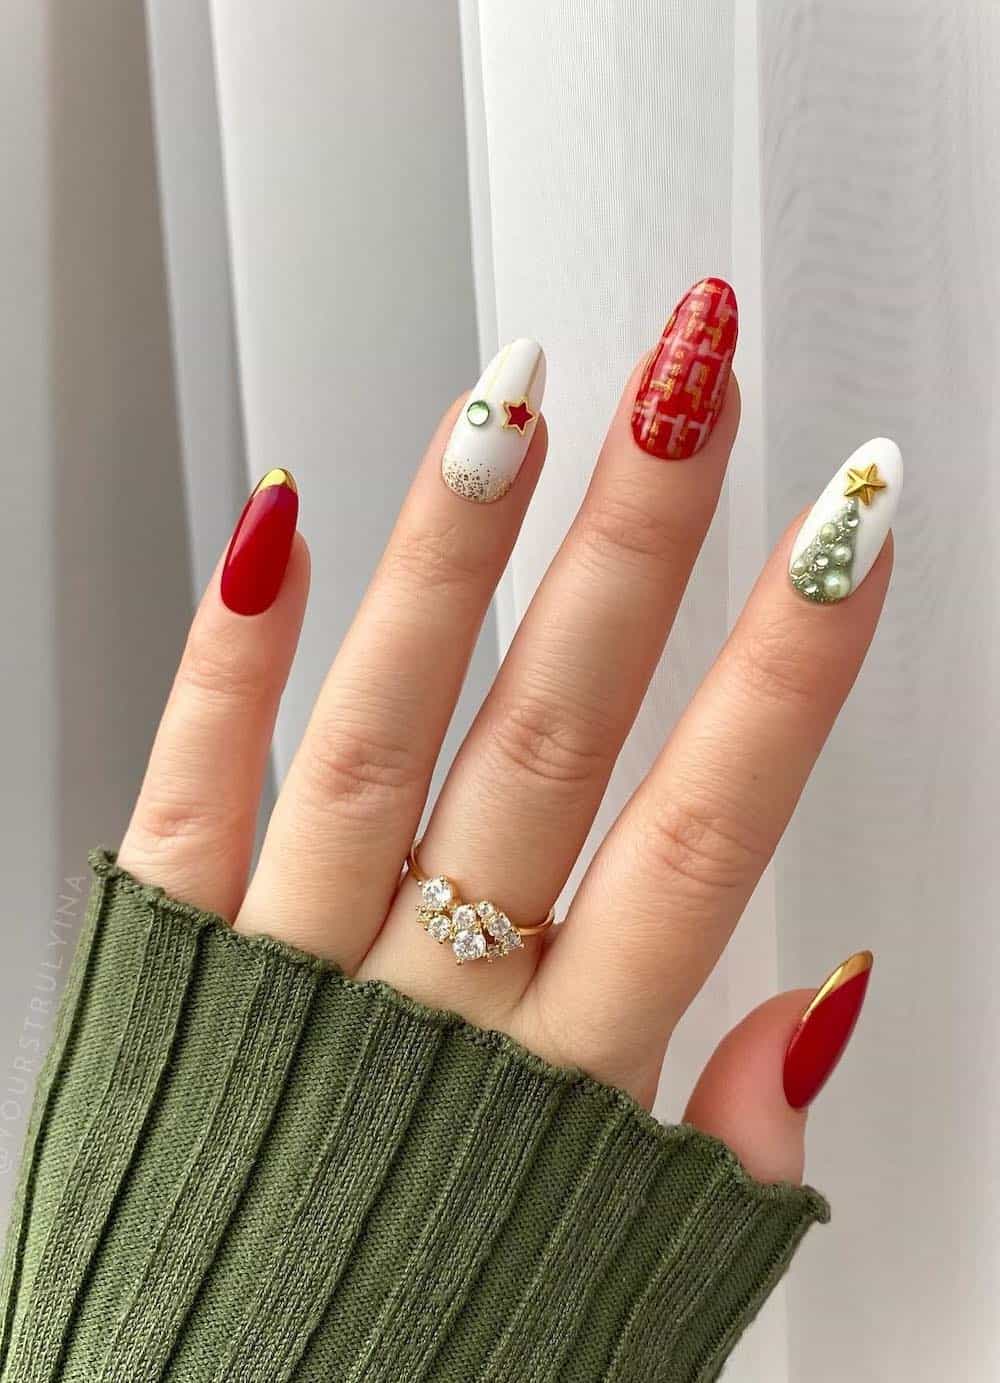 Red and white Holiday manicure with a green Christmas tree detail and star jewels.